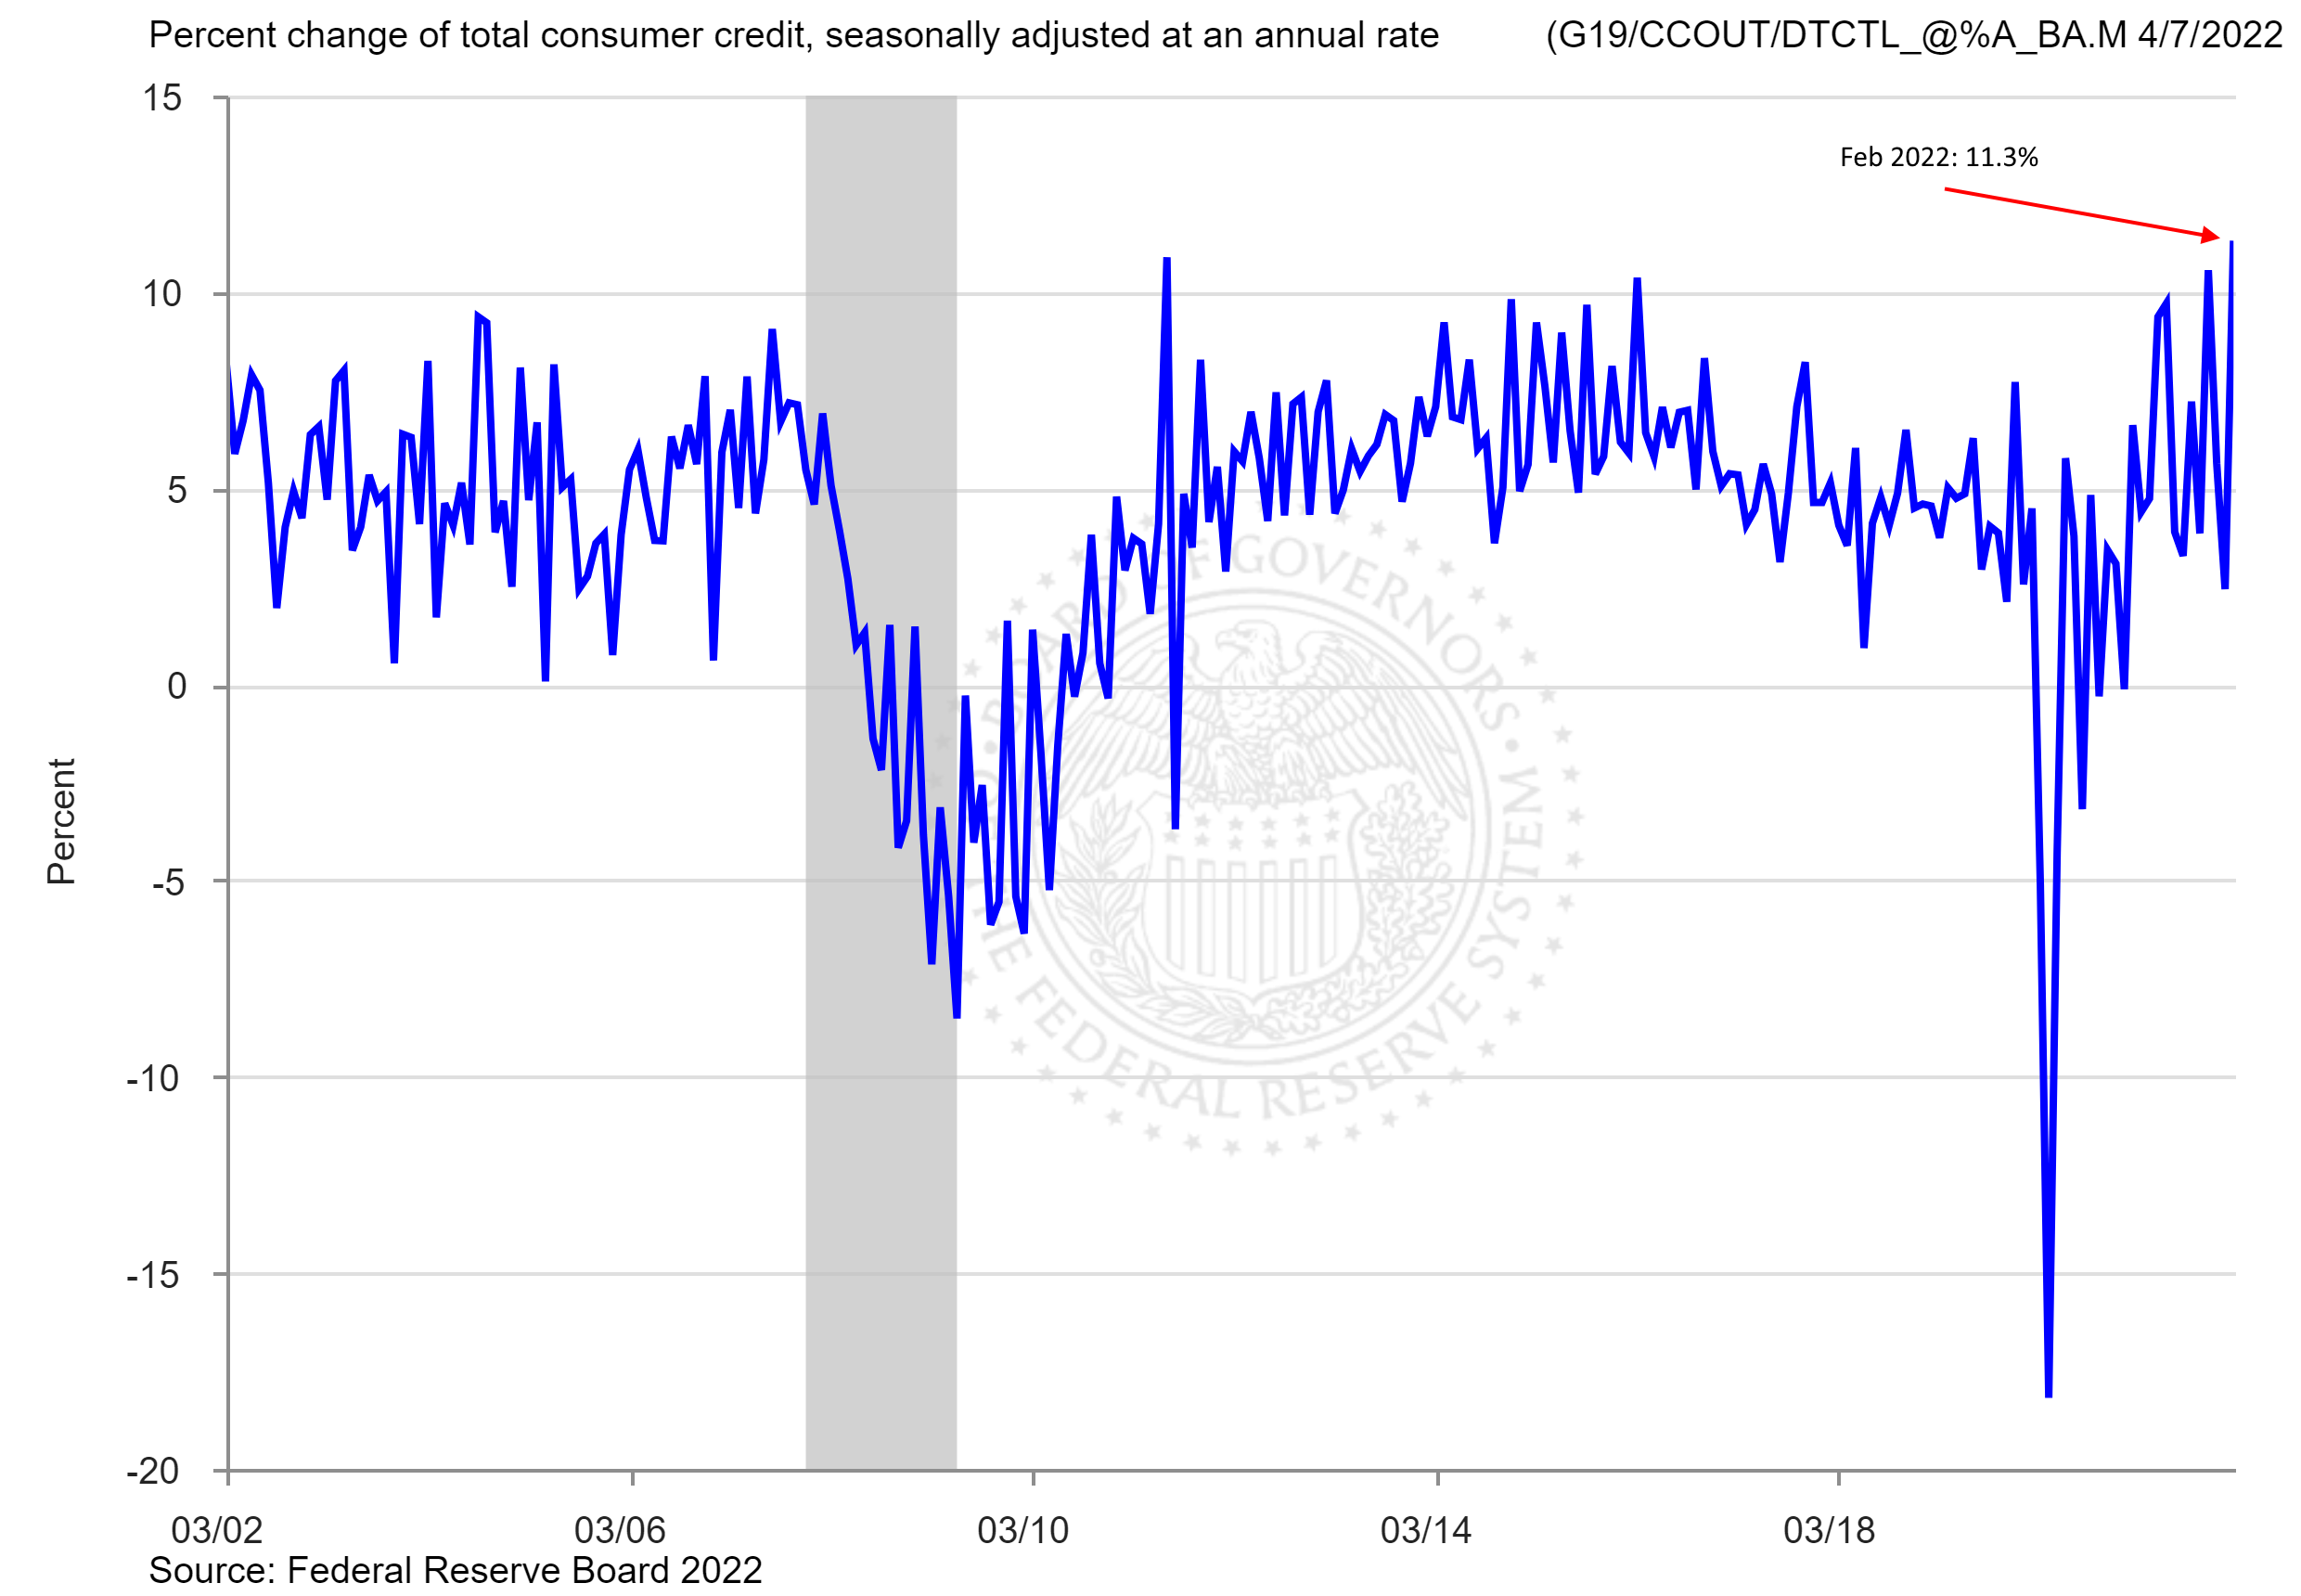 Percent change of total consumer credit, seasonally adjusted at an annual rate, March 2002-February 2022. Debt levels jumped by nearly $42 billion to a total of almost $4.5 trillion, an annual increase of 11.3 percent, seasonally adjusted, which set a new high and far outperformed economists’ expectations. In January 2022, total credit had grown only 2.4 percent. Graphic: U.S. Federal Reserve Board